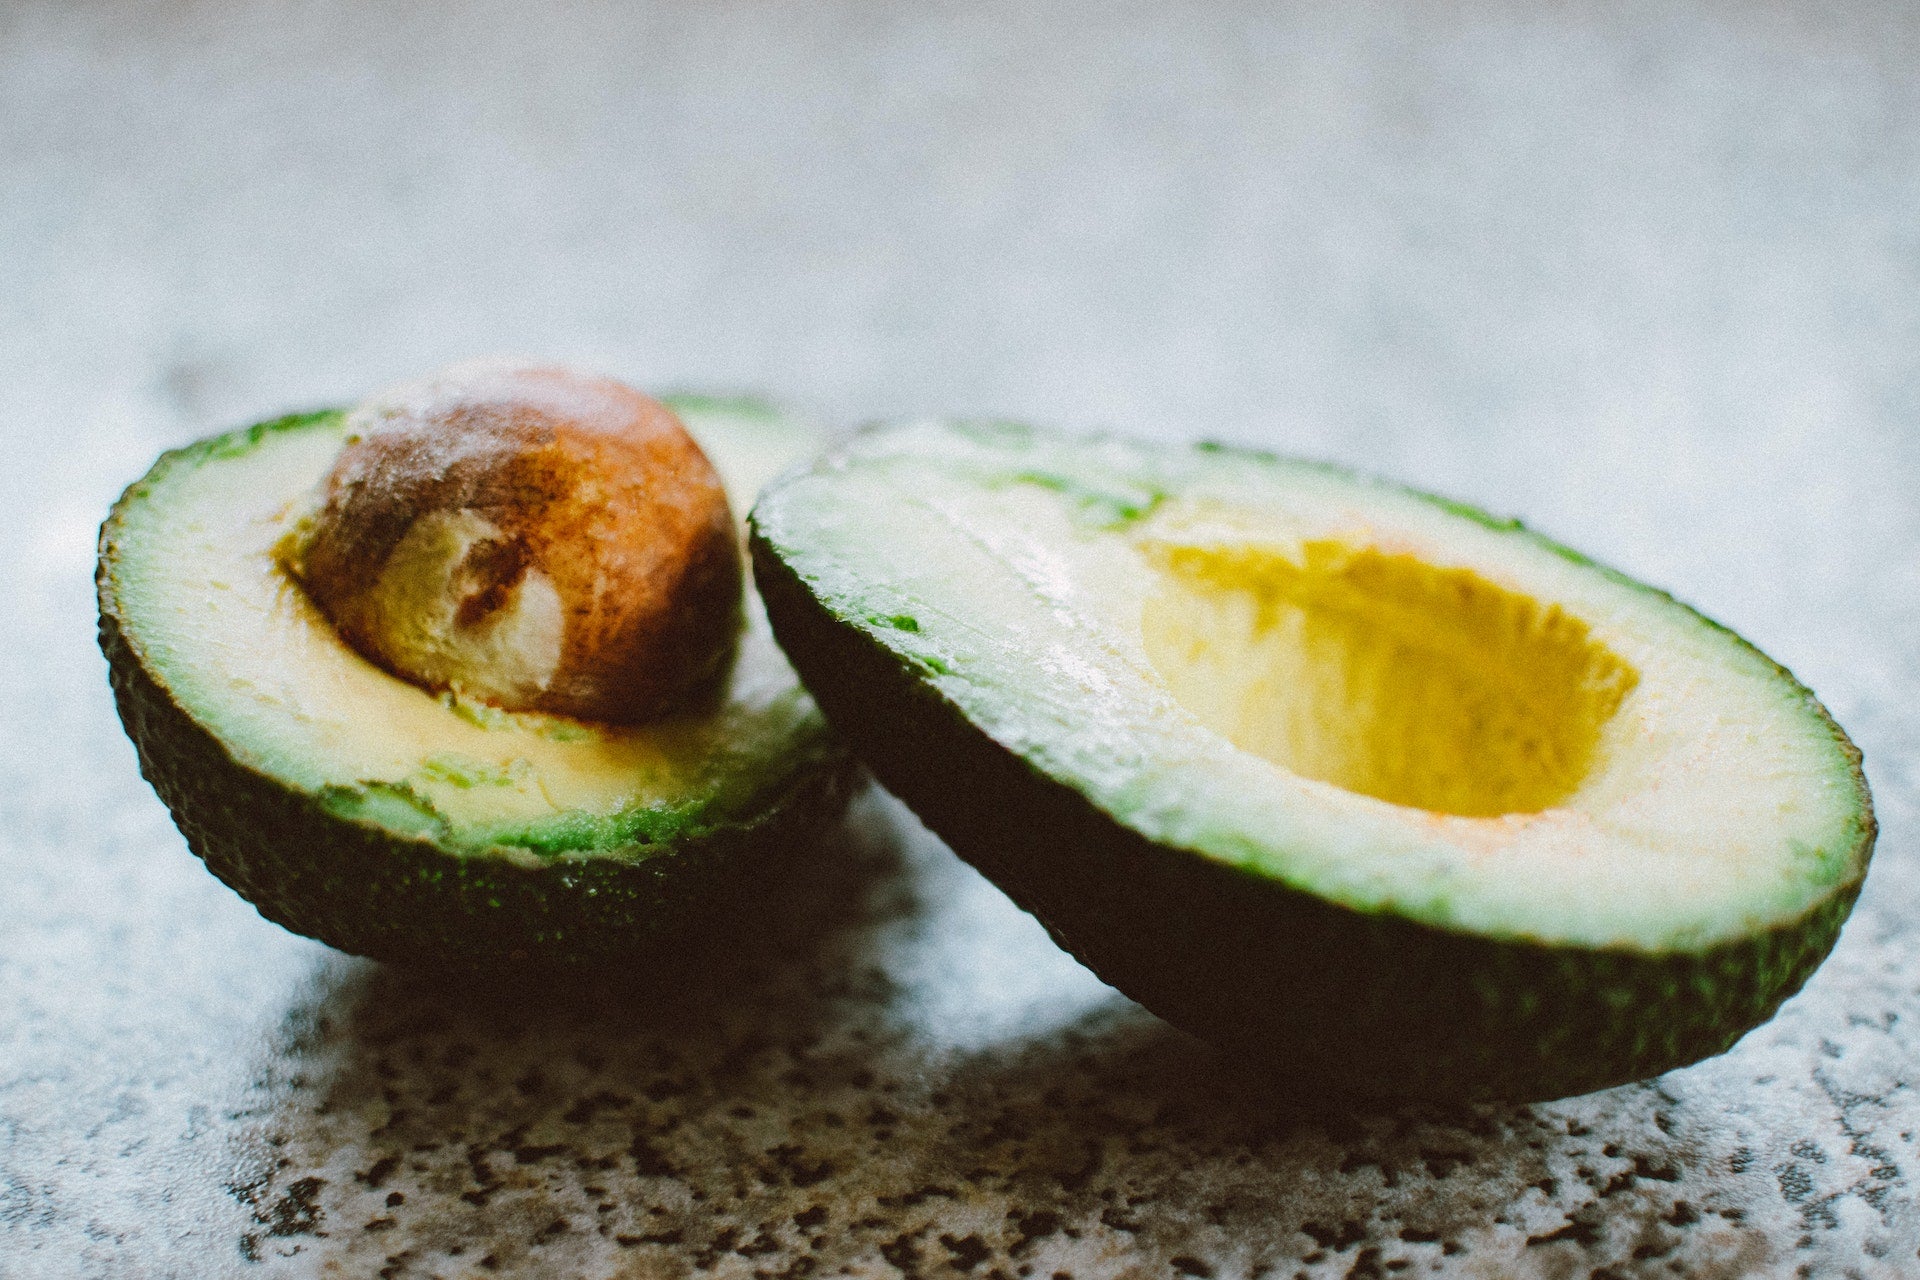 Two halves of a perfectly ripe avocado